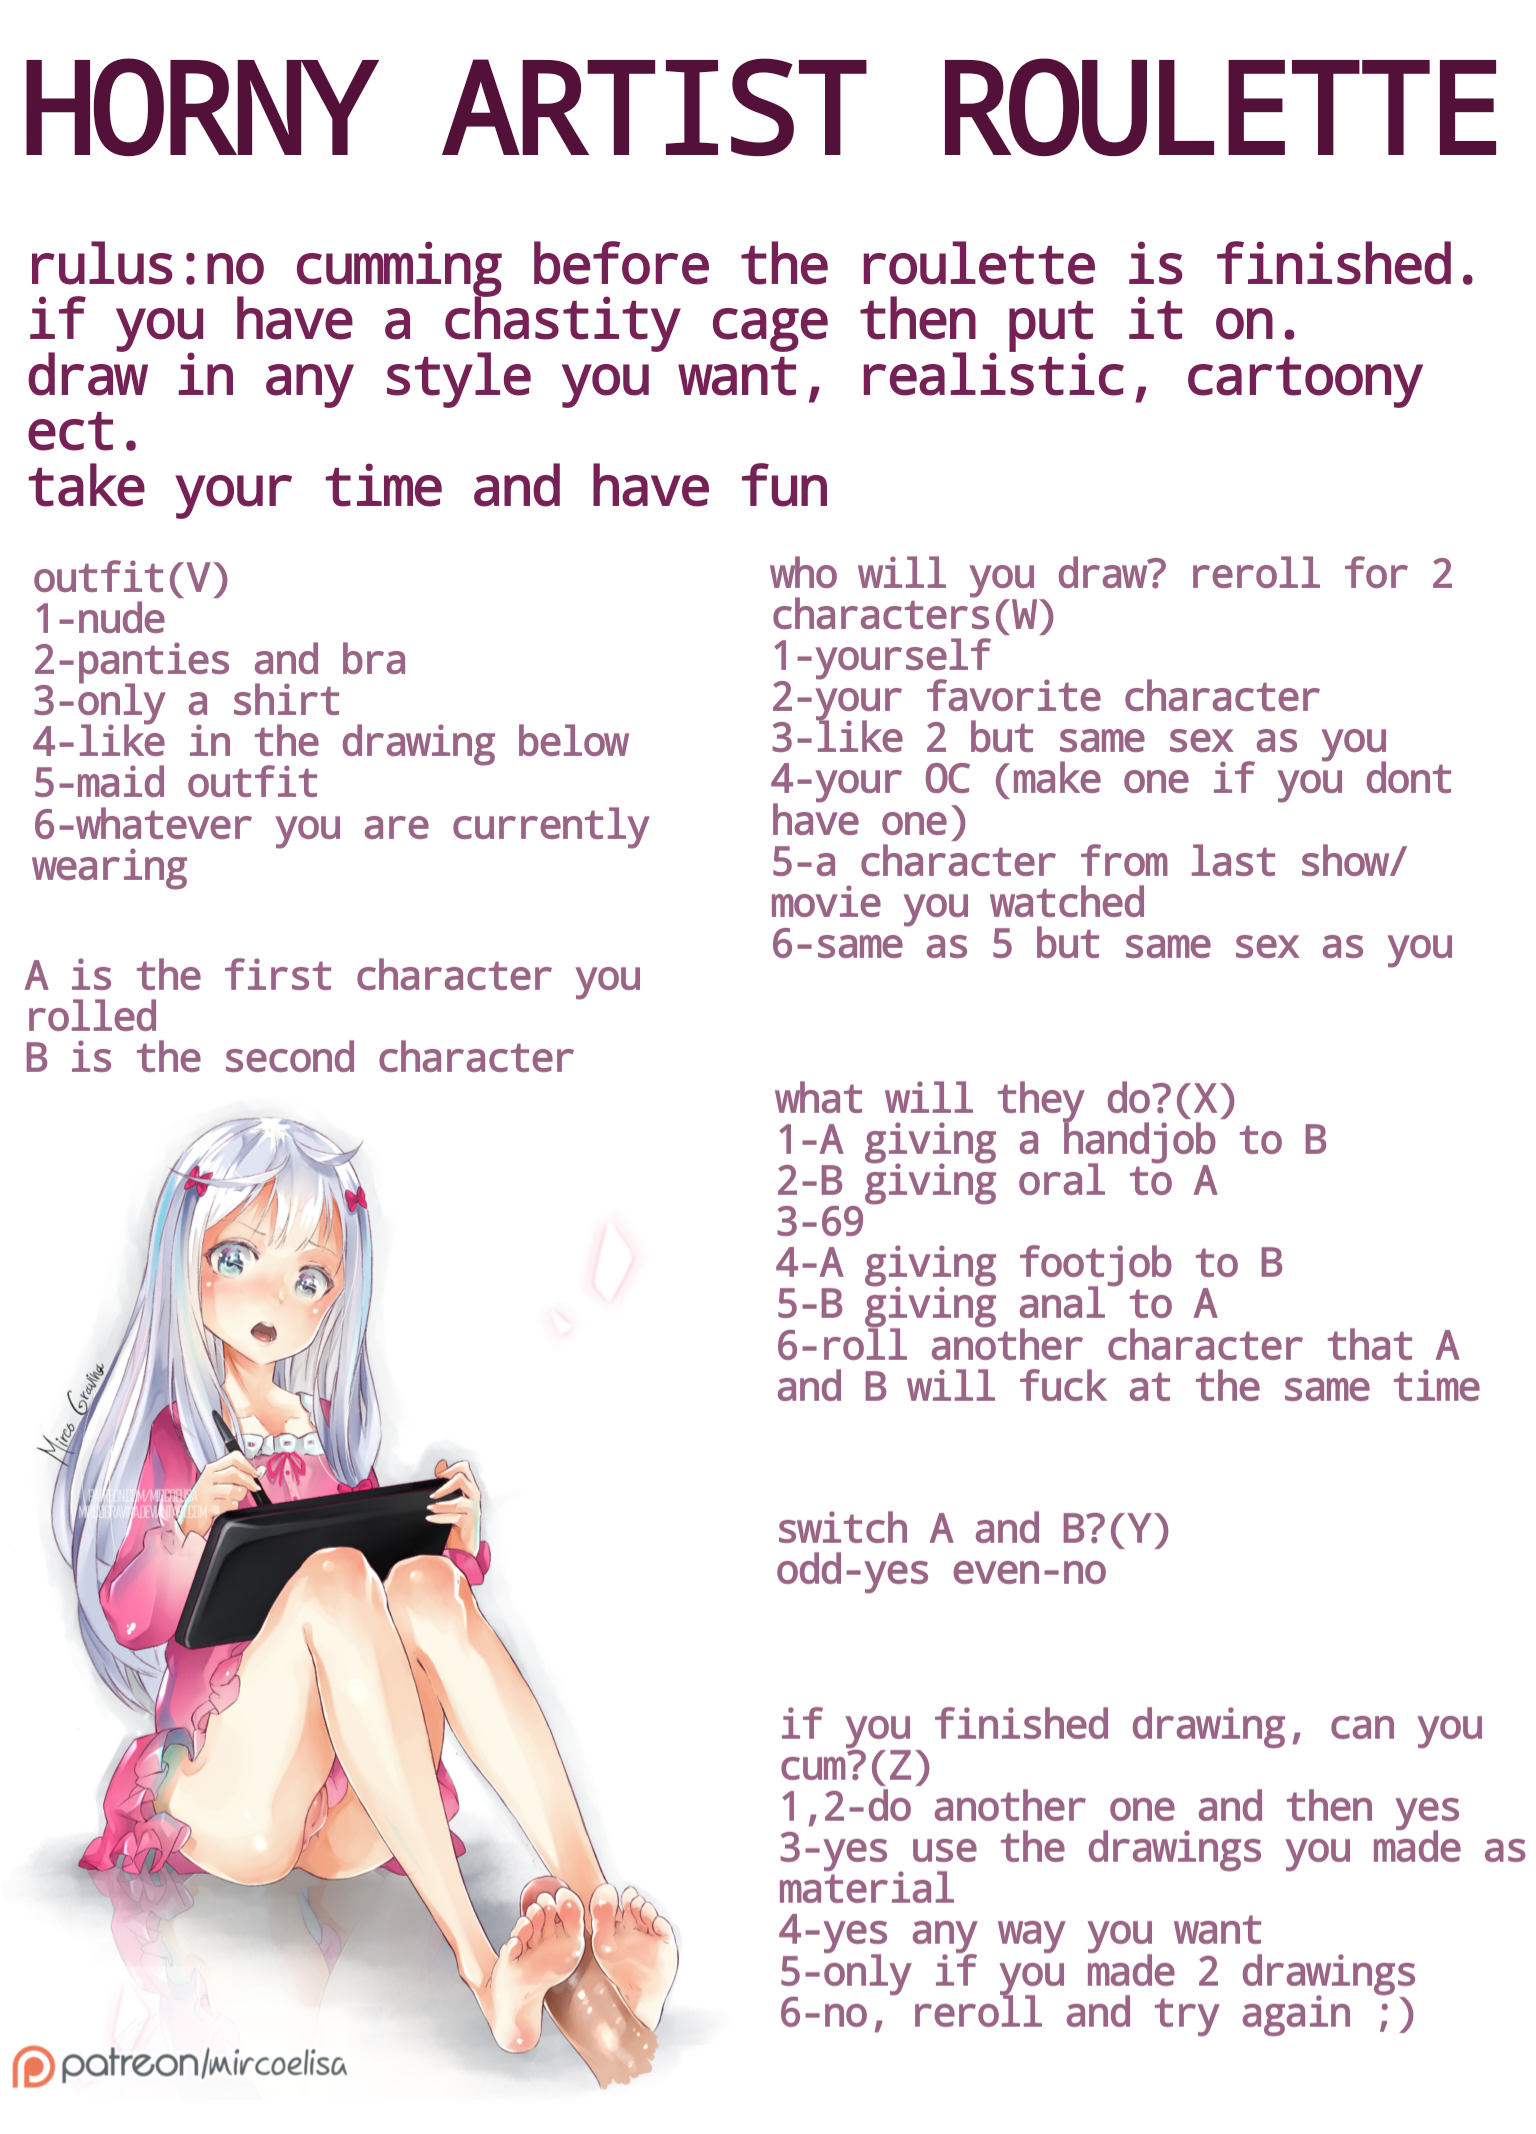 Horny artist drawing roulette - Fap Roulette